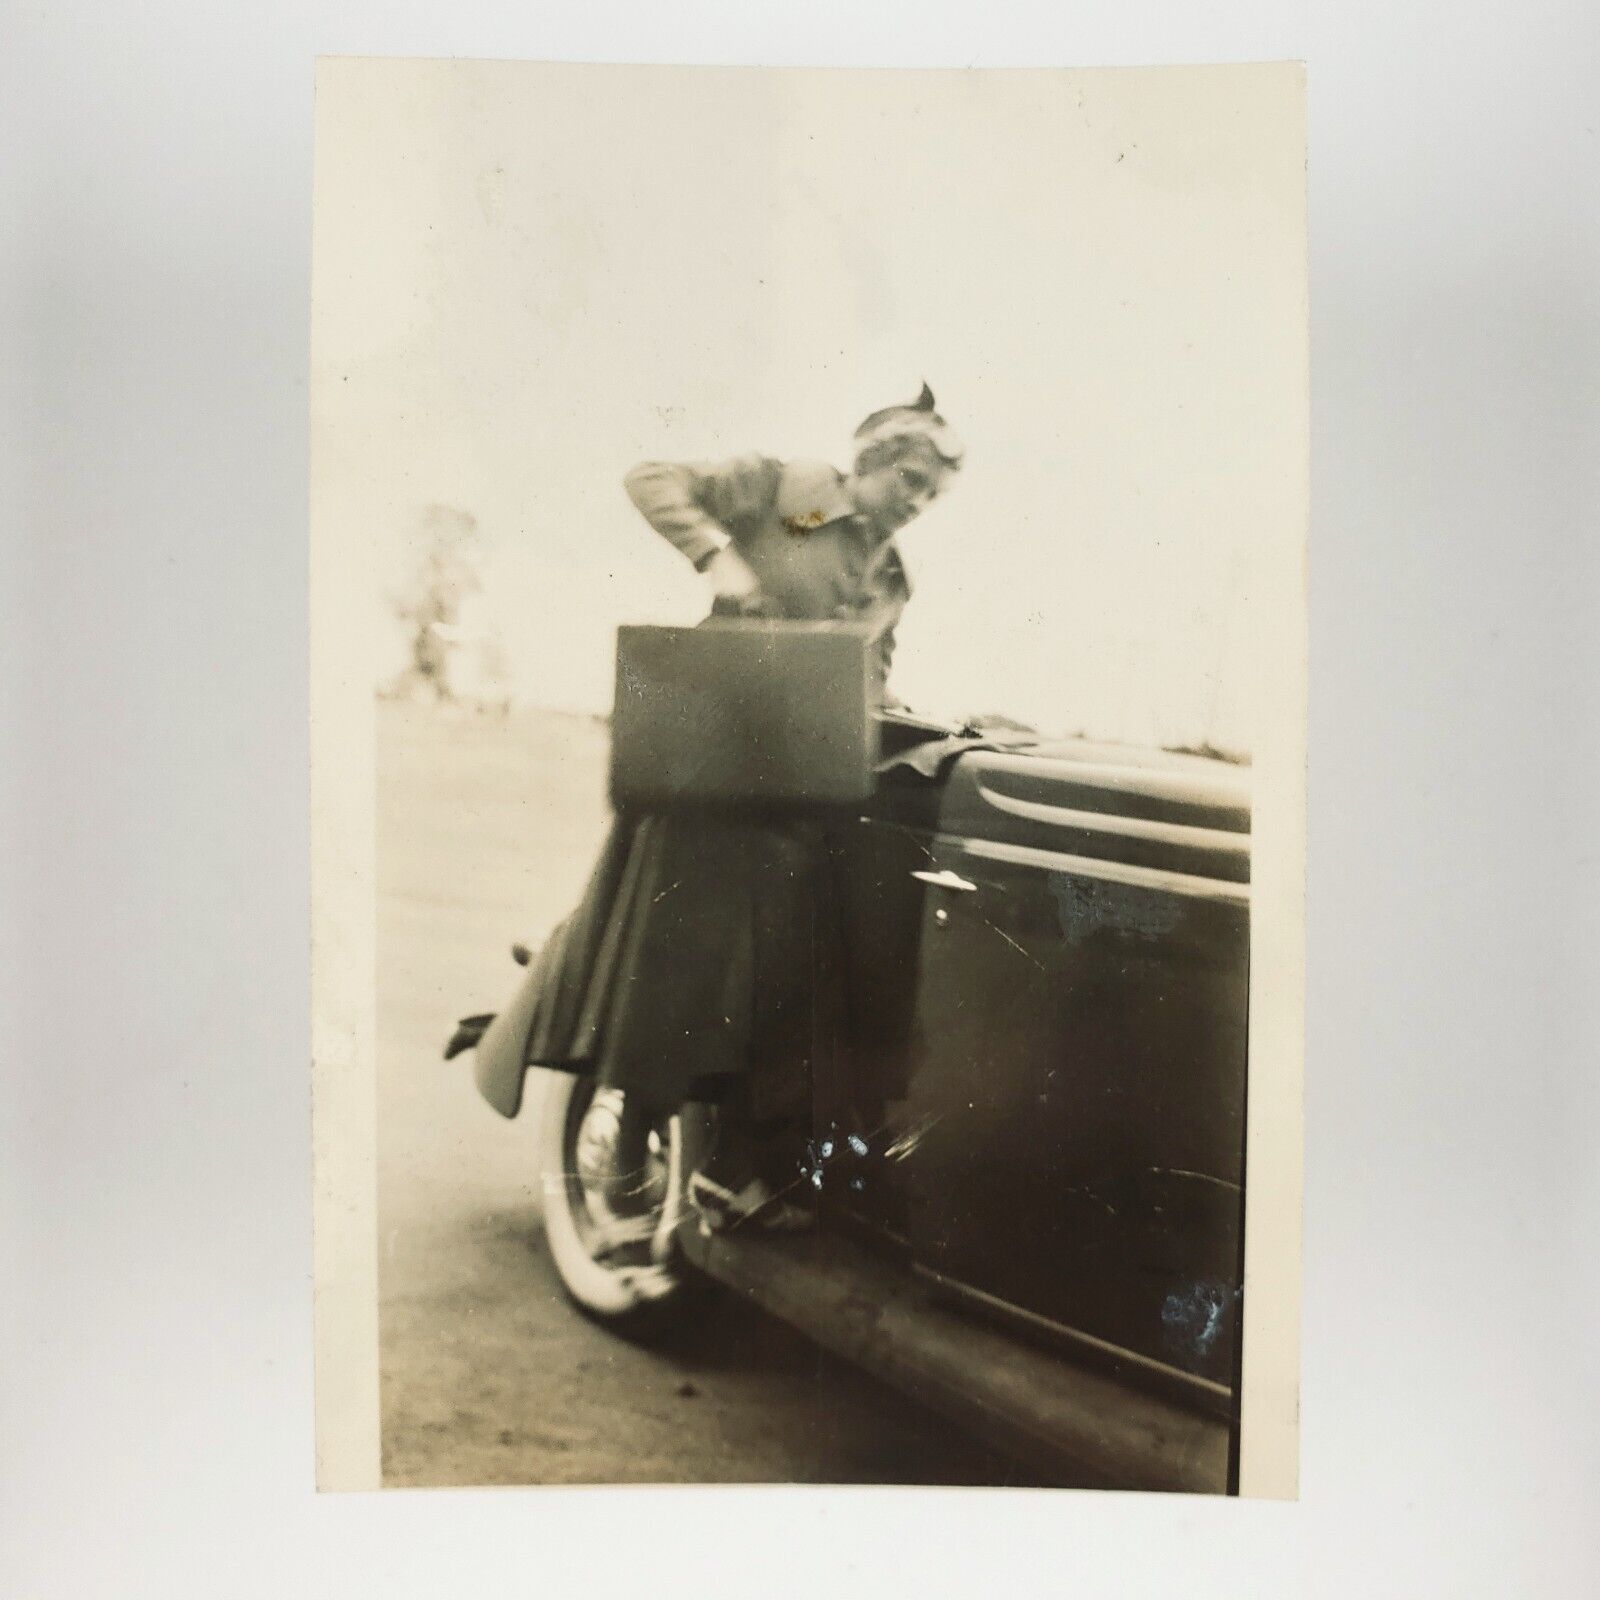 Blurry Woman Packing Suitcase Photo 1940s OId Car Luggage Lady Snapshot C2830